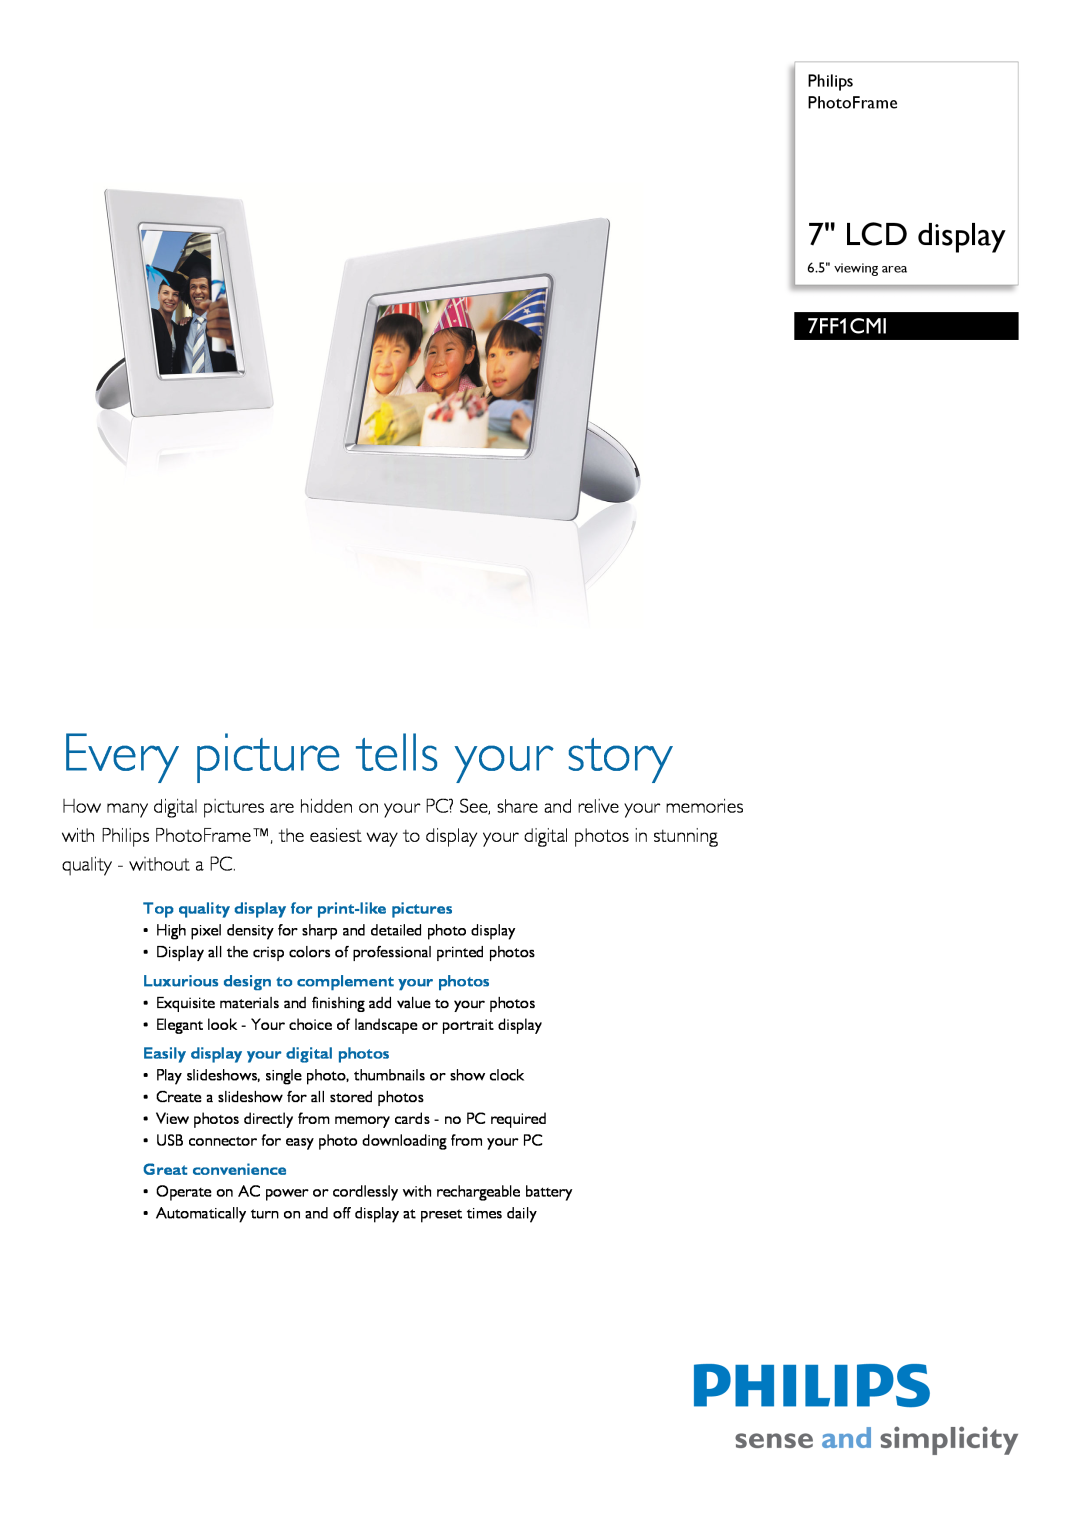 Philips 7FF1CMI/37 manual Philips PhotoFrame, Every picture tells your story, LCD display 